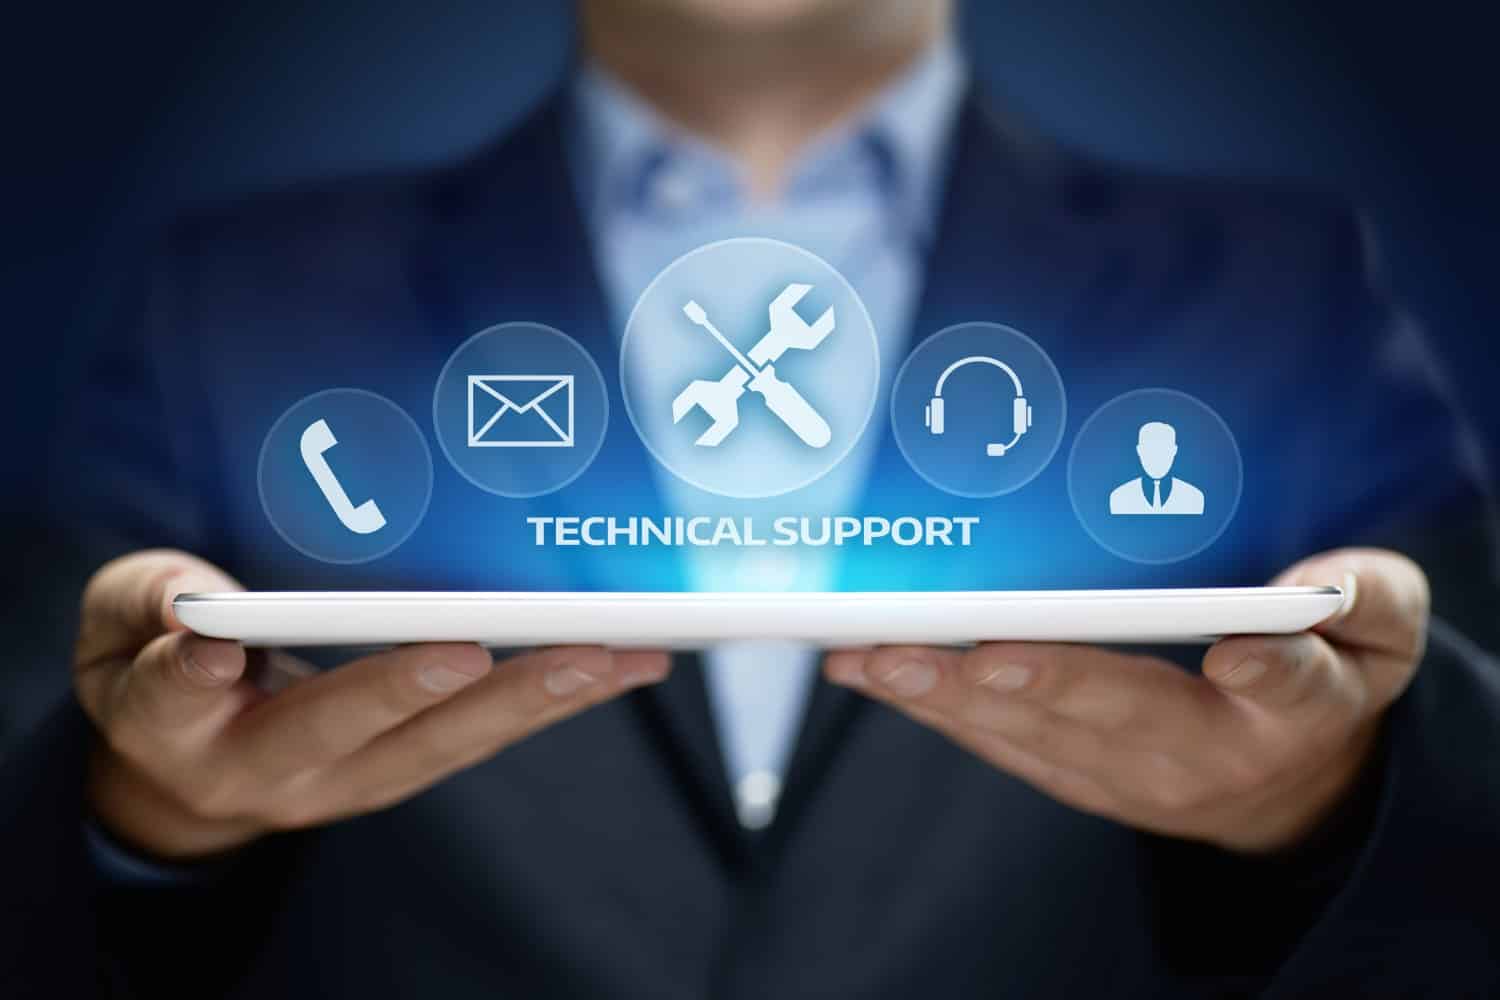 Technical support available for all computer related topics 